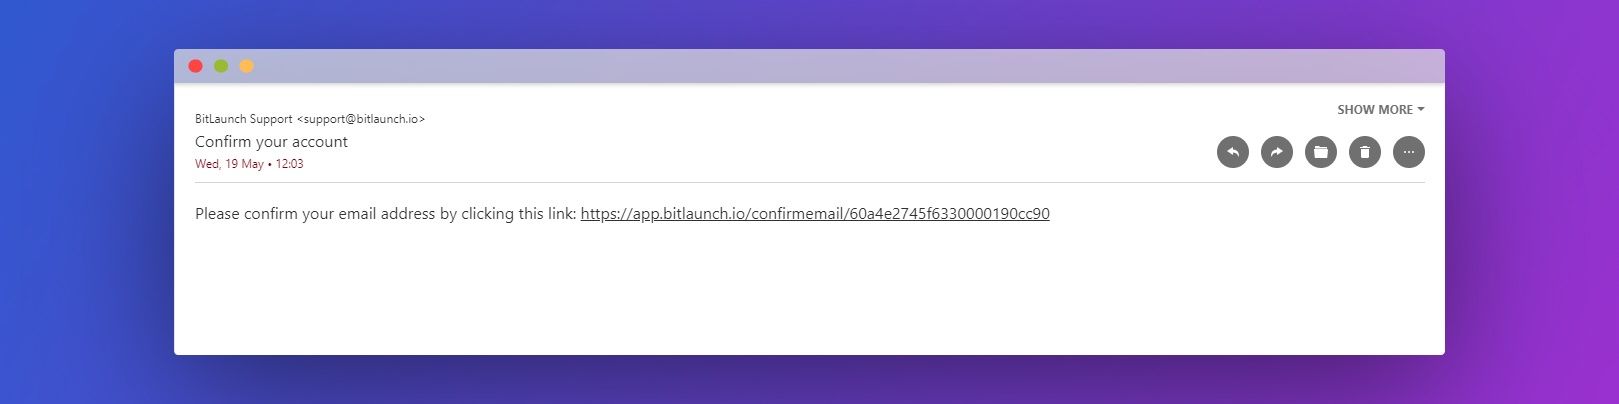 BitLaunch confirmation email